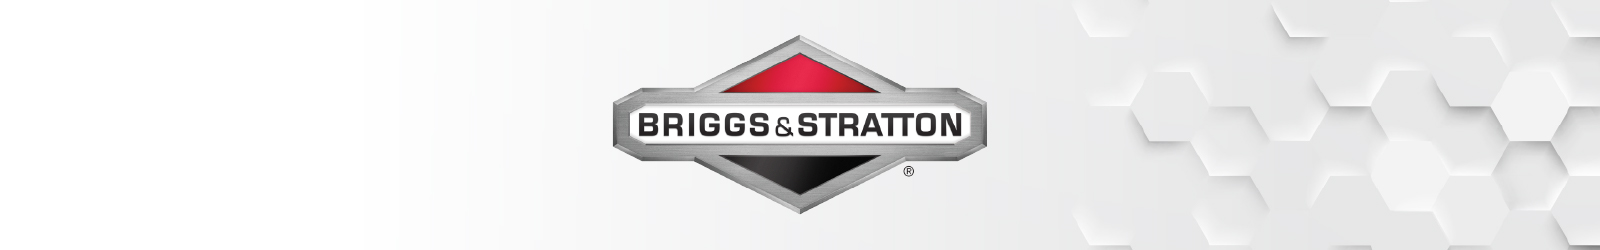 Briggs & Stratton Promotional Offers 